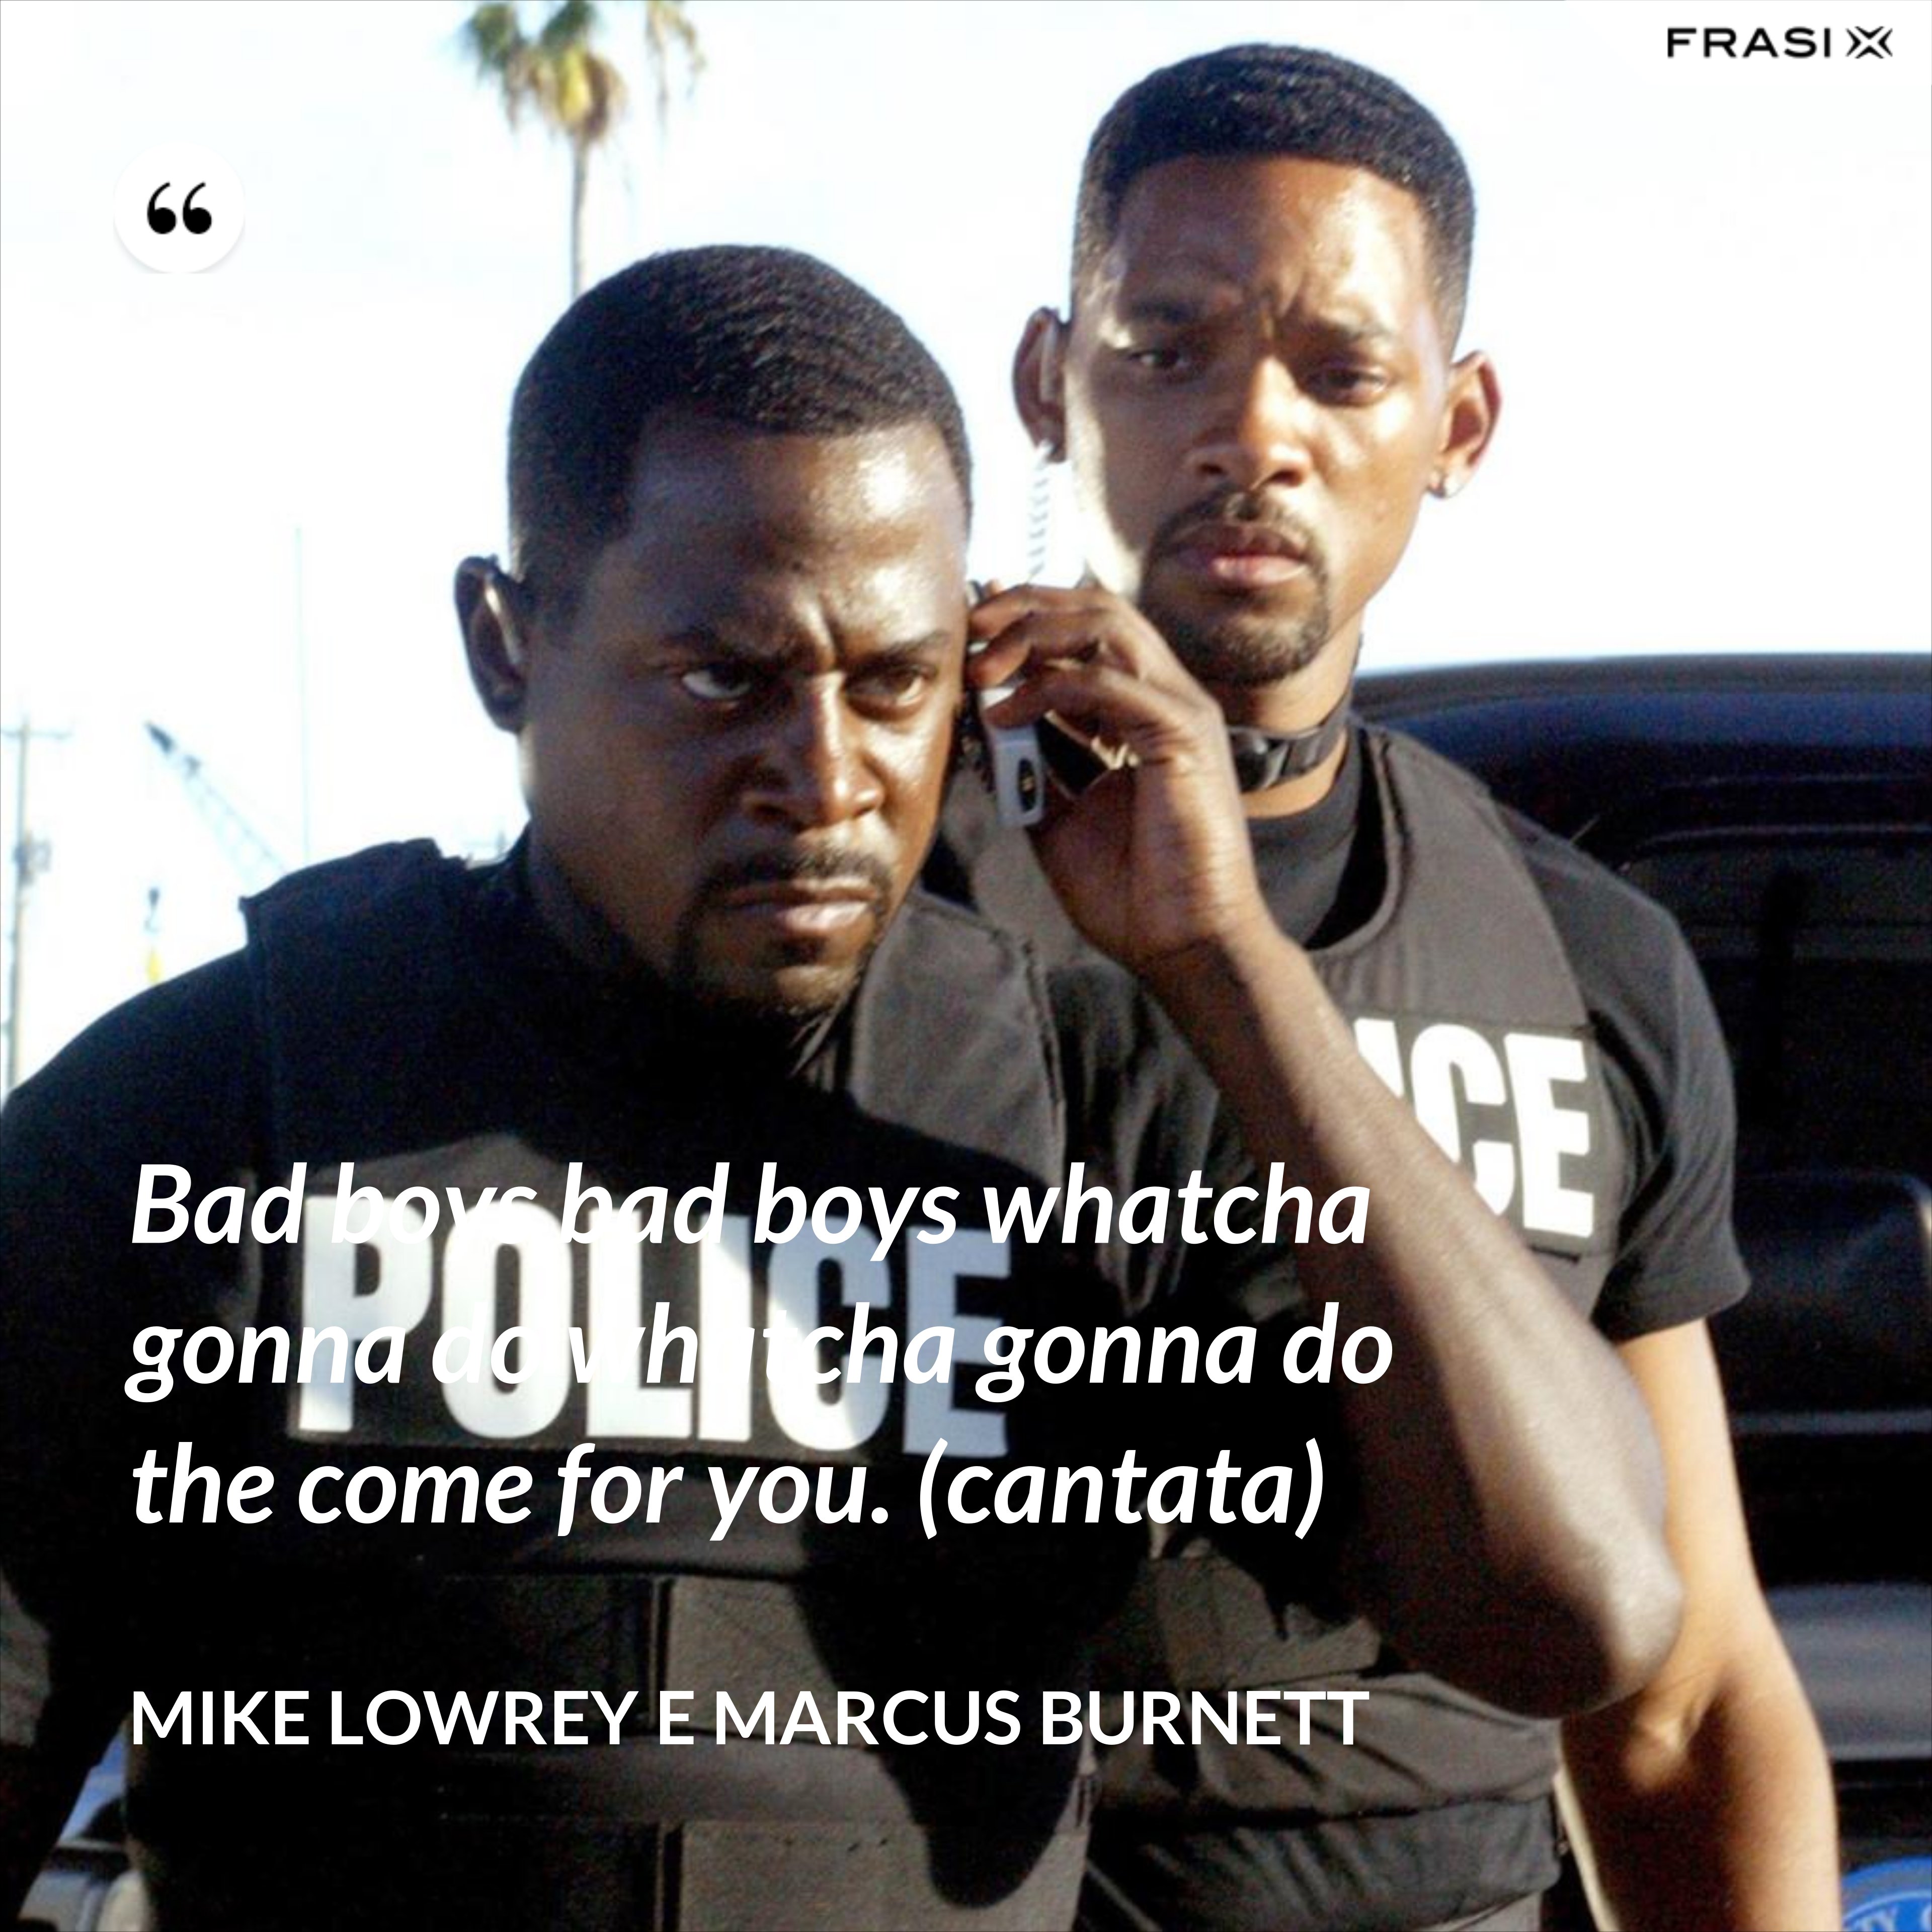 Bad boys bad boys whatcha gonna do whatcha gonna do the come for you. (cantata) - Mike Lowrey e Marcus Burnett